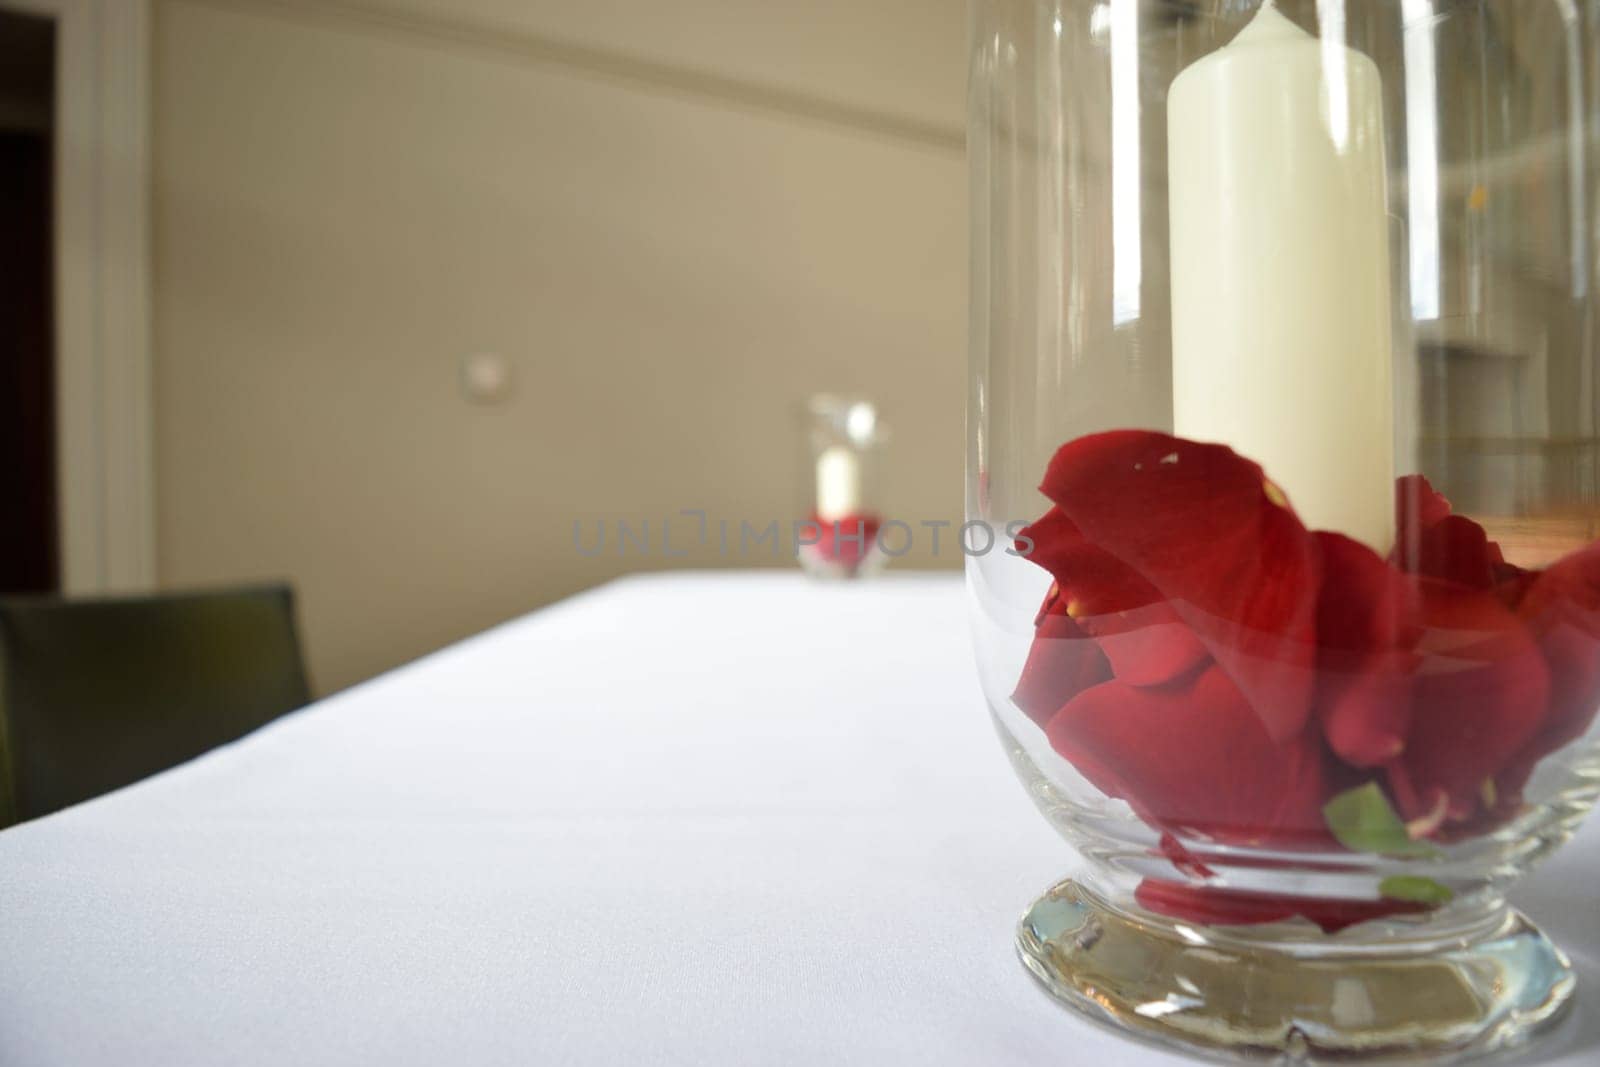 A white candle surrounded by red rose petals in a glass vase on a white tablecloth, with another similar arrangement blurred in the background.